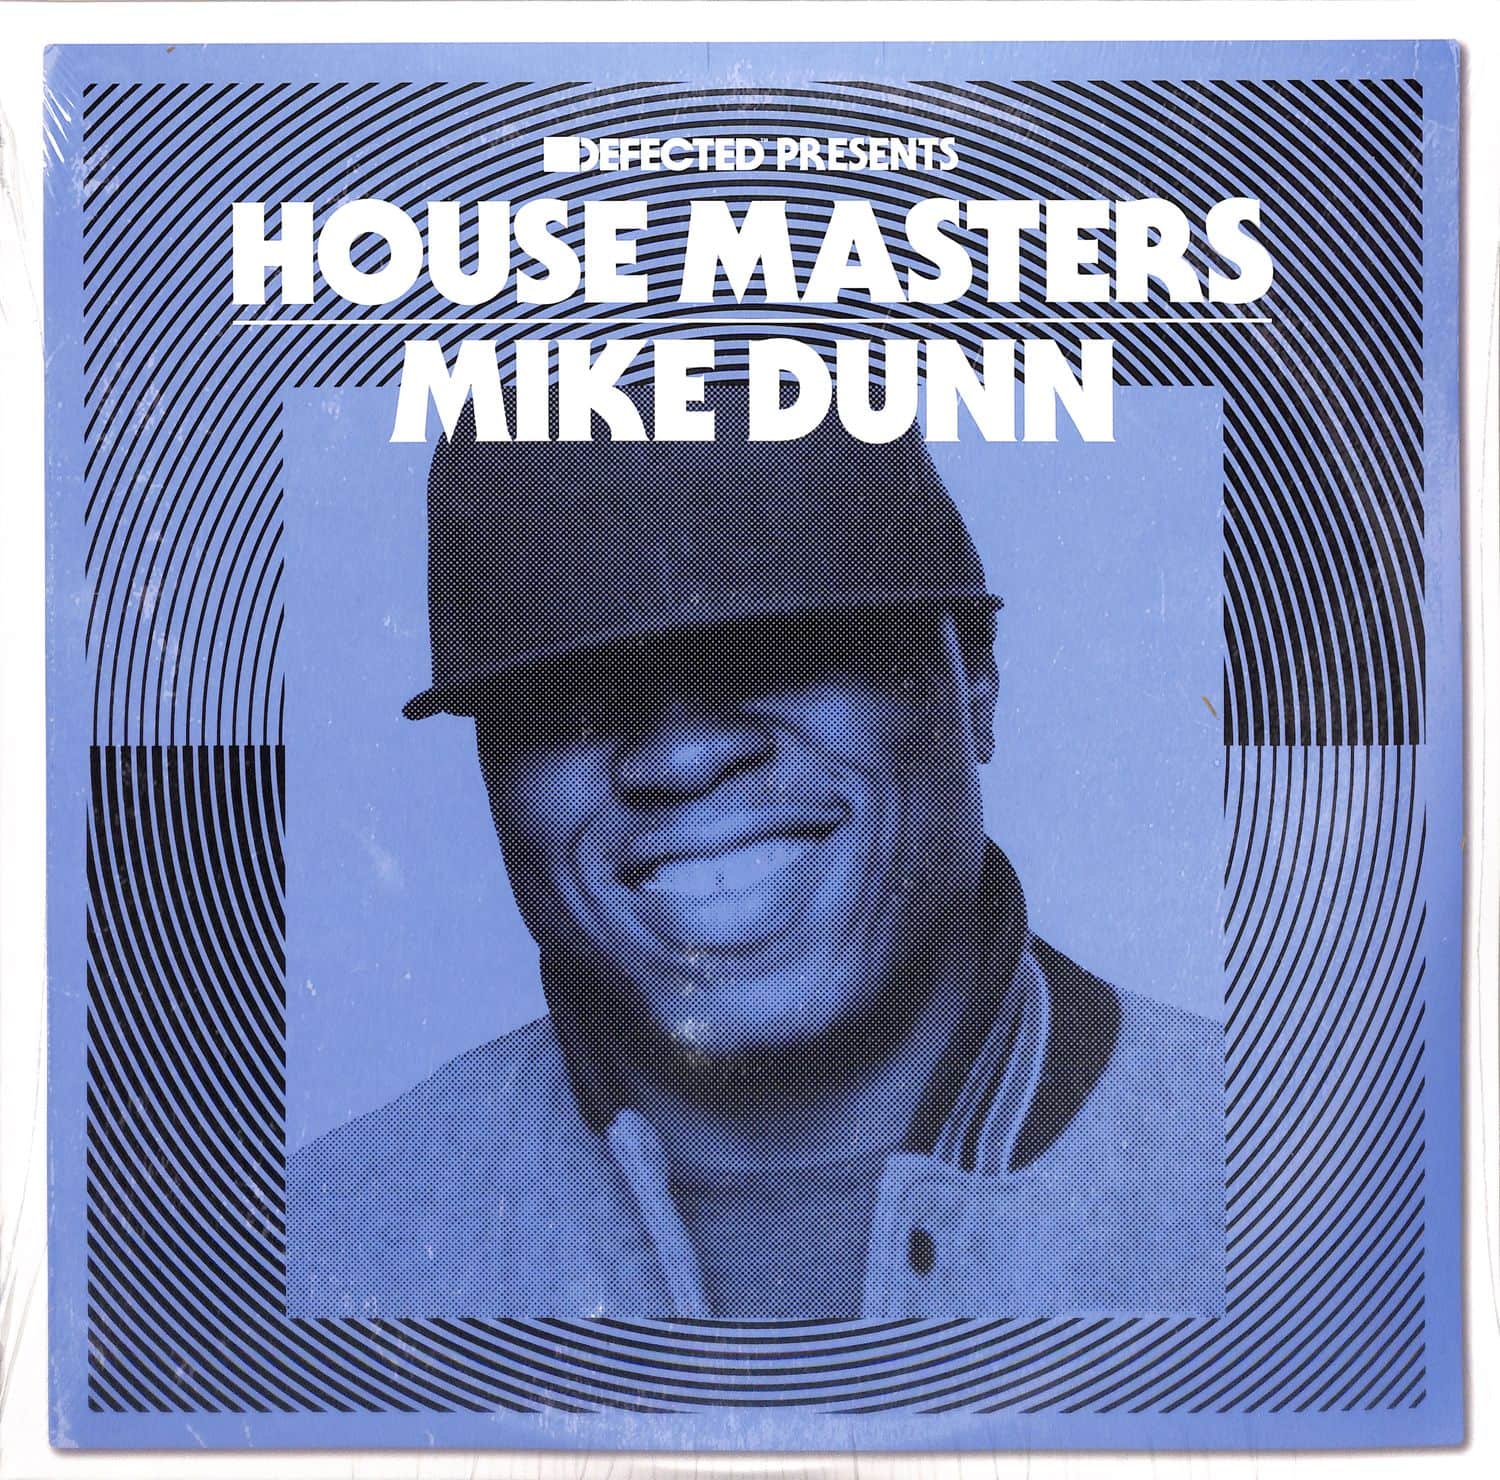 Mike Dunn - DEFECTED PRESENTS HOUSE MASTERS MIKE DUNN 